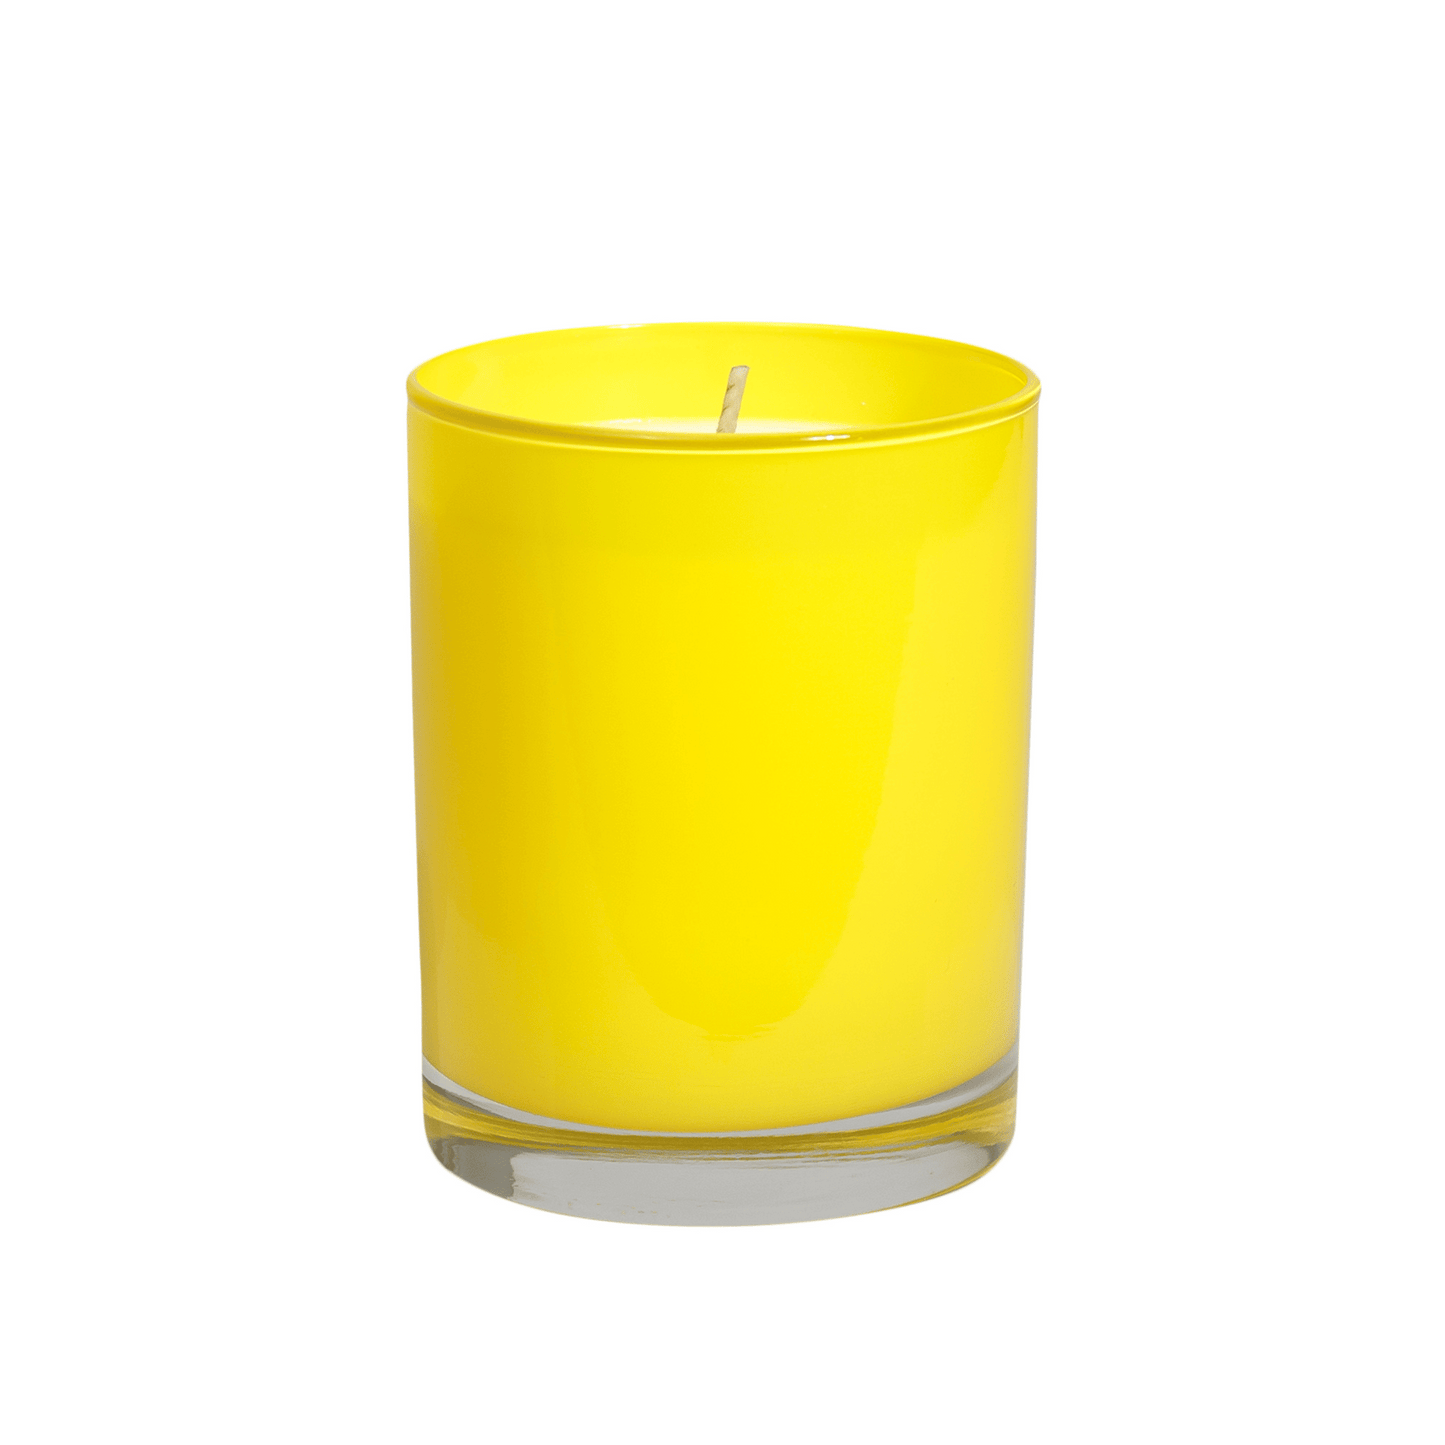 Alternate Image of Sunshine Road Trip 11 oz. Pure Soy Candle